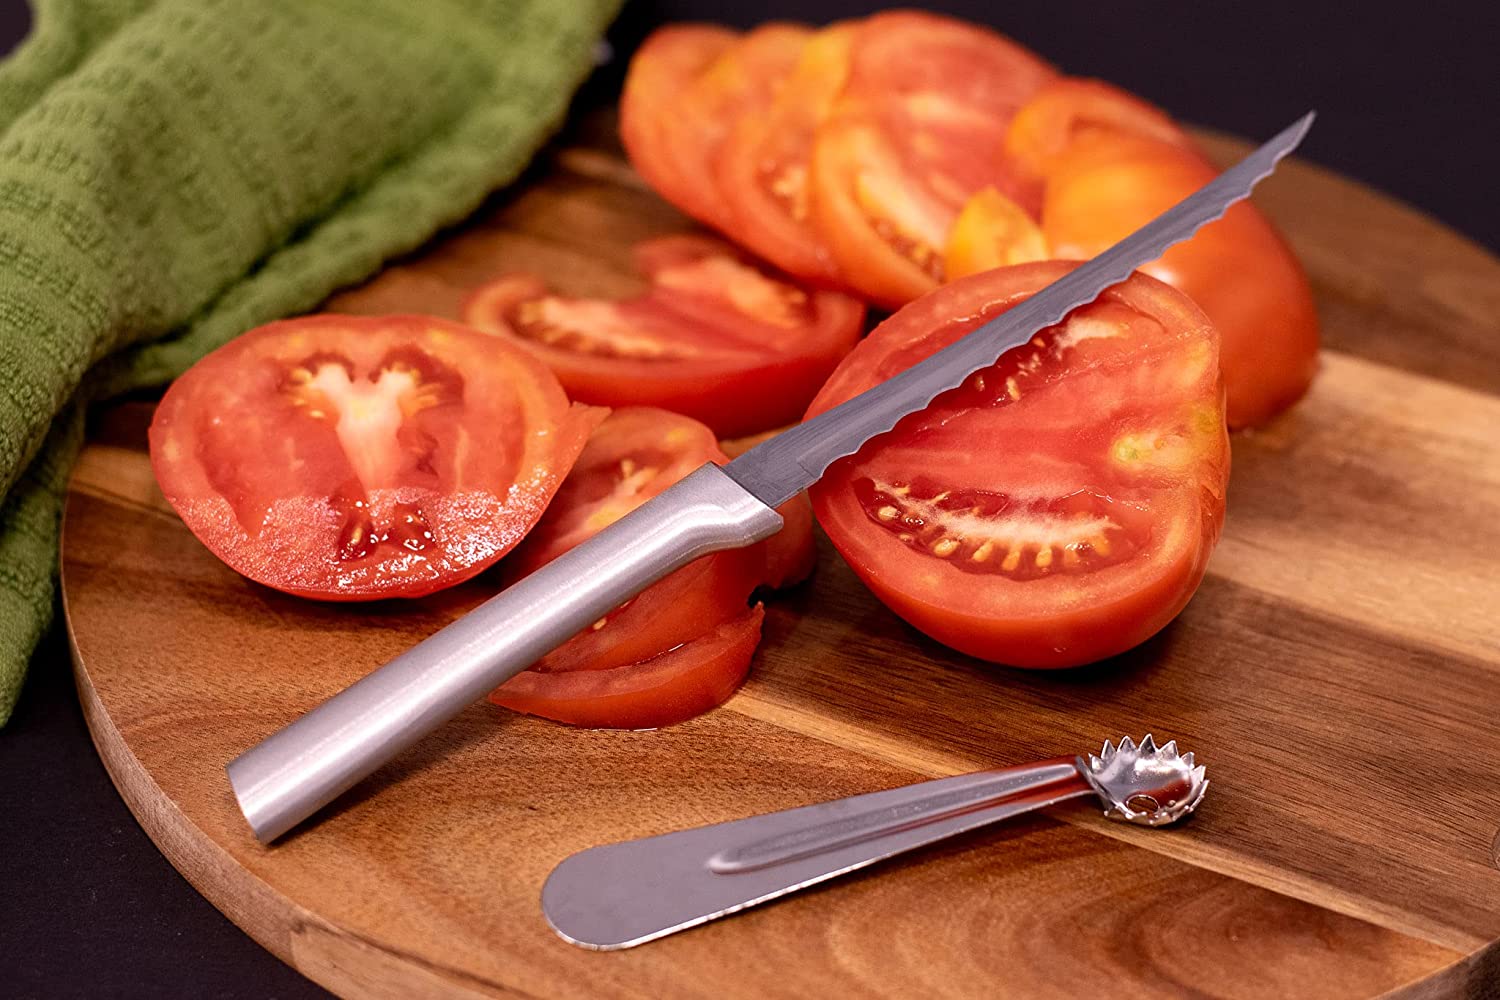 Waring Tomato Press  Pickling crock, Cookware and bakeware, Cooking